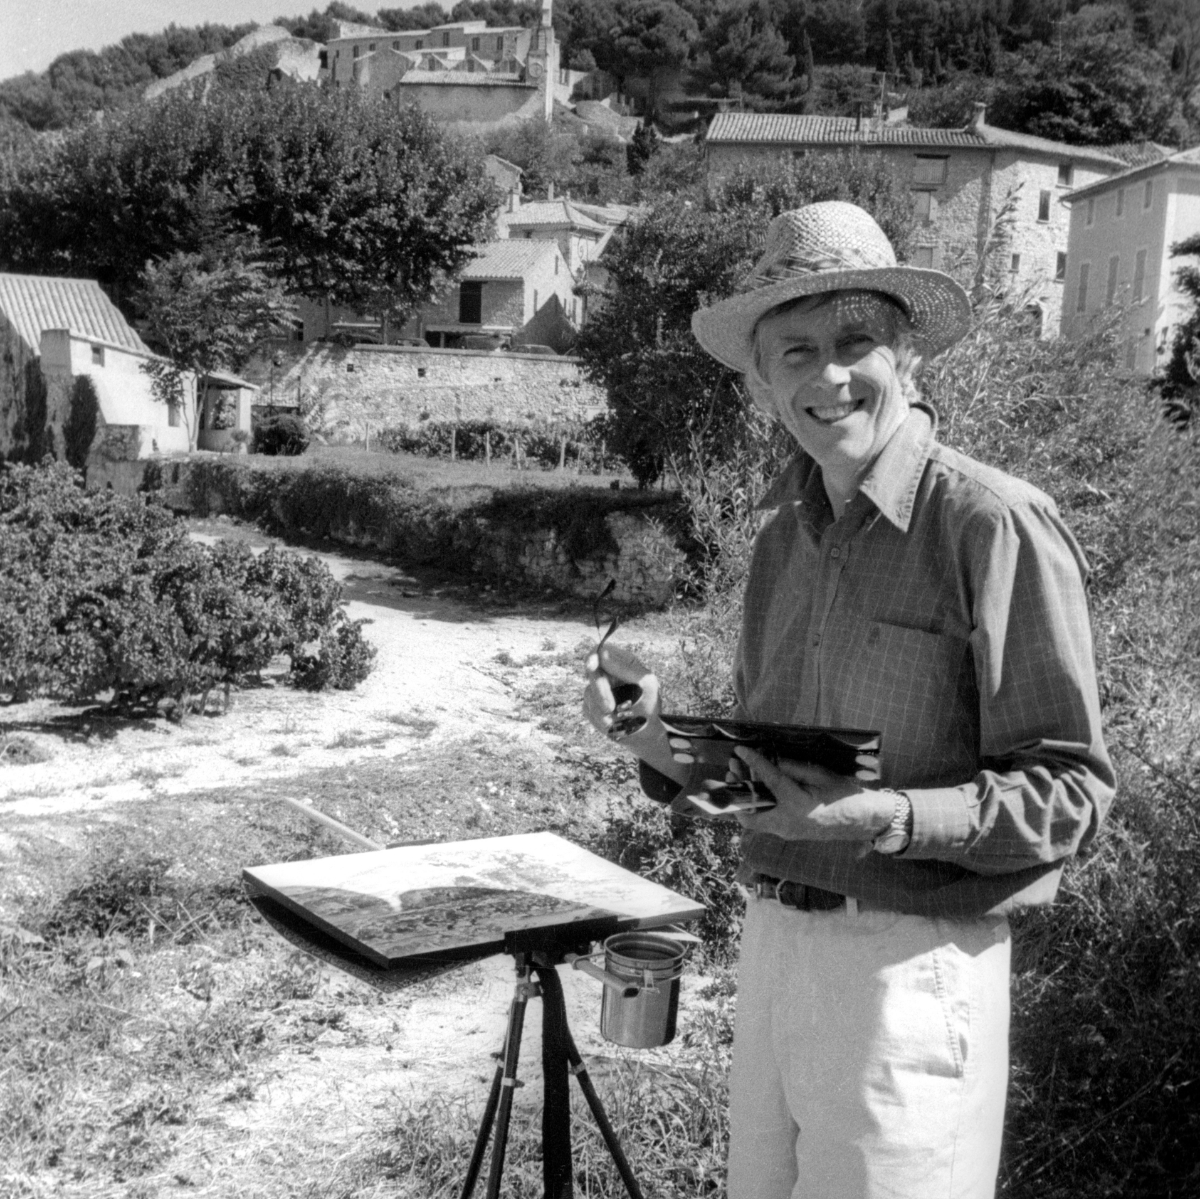 Ted Dyer at work in Provence painting at his easel in a vineyard in the village of Gigondas